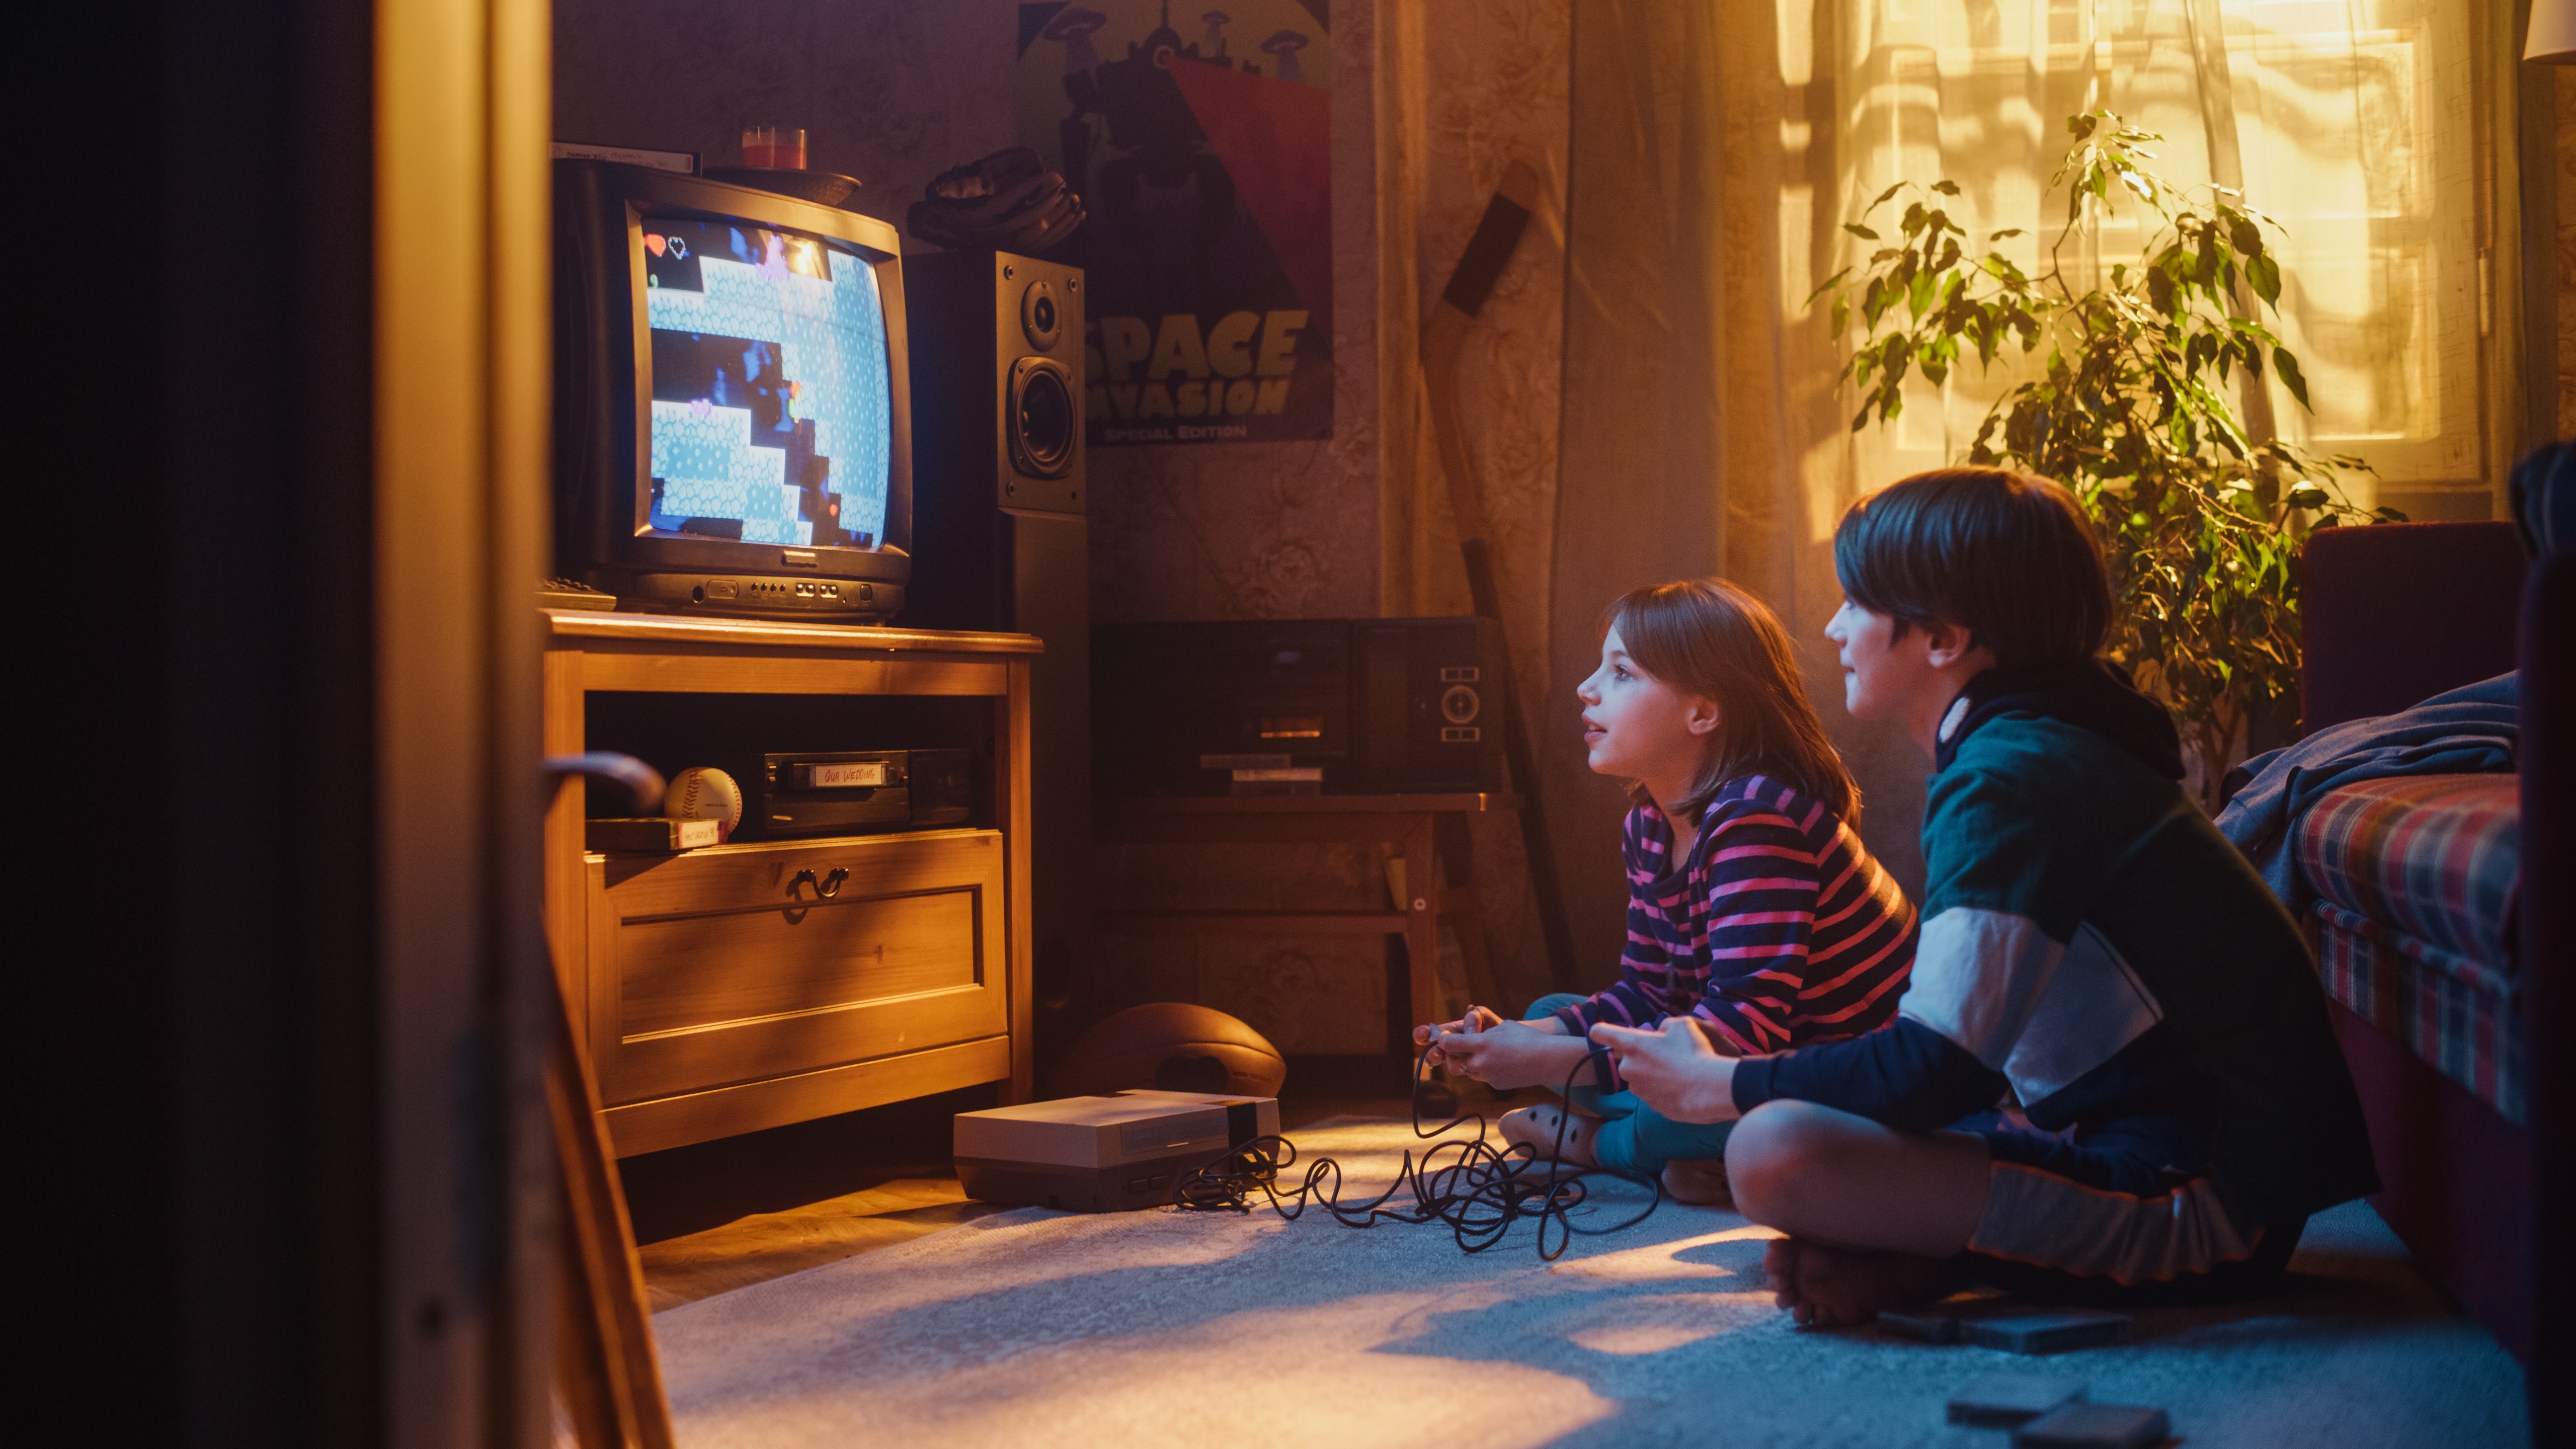 A boy and a girl sitting on the floor playing a retro video game